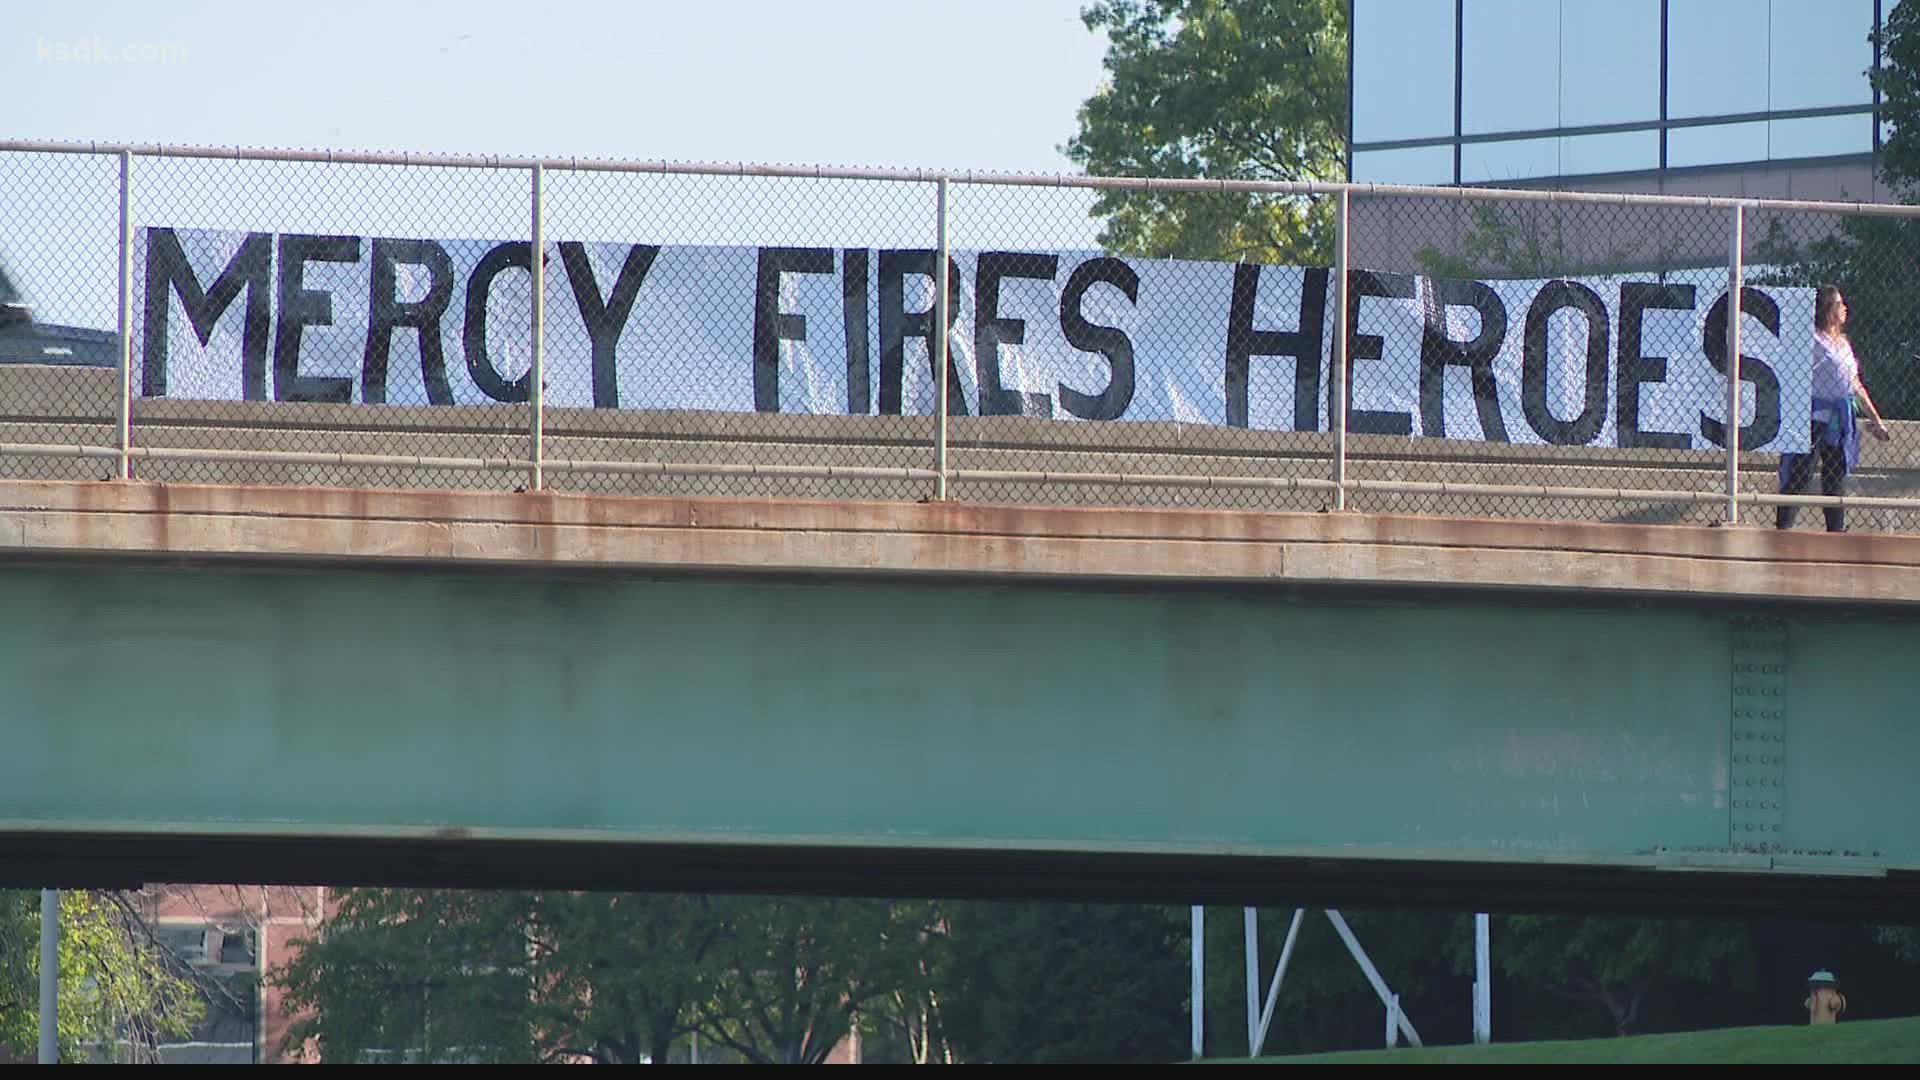 A large signed grabbed the attention of drivers along a busy stretch of highway in west St. Louis County.